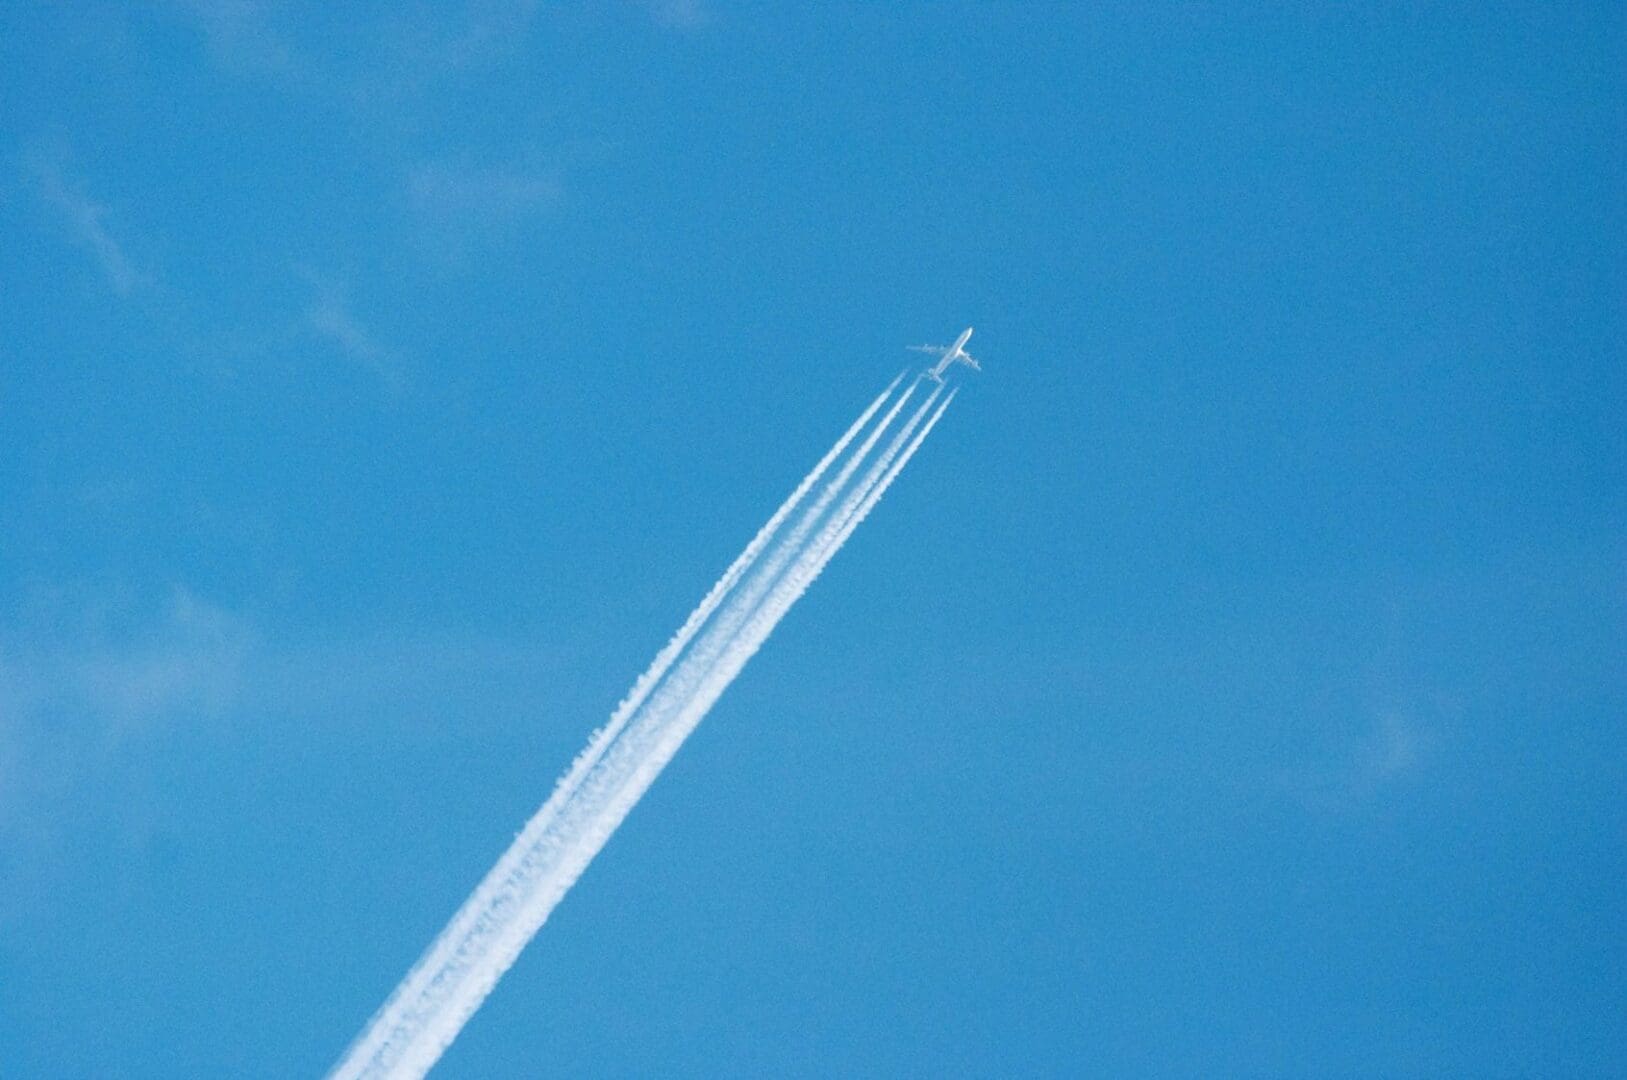 A plane flying in the sky with its tail trailing behind.